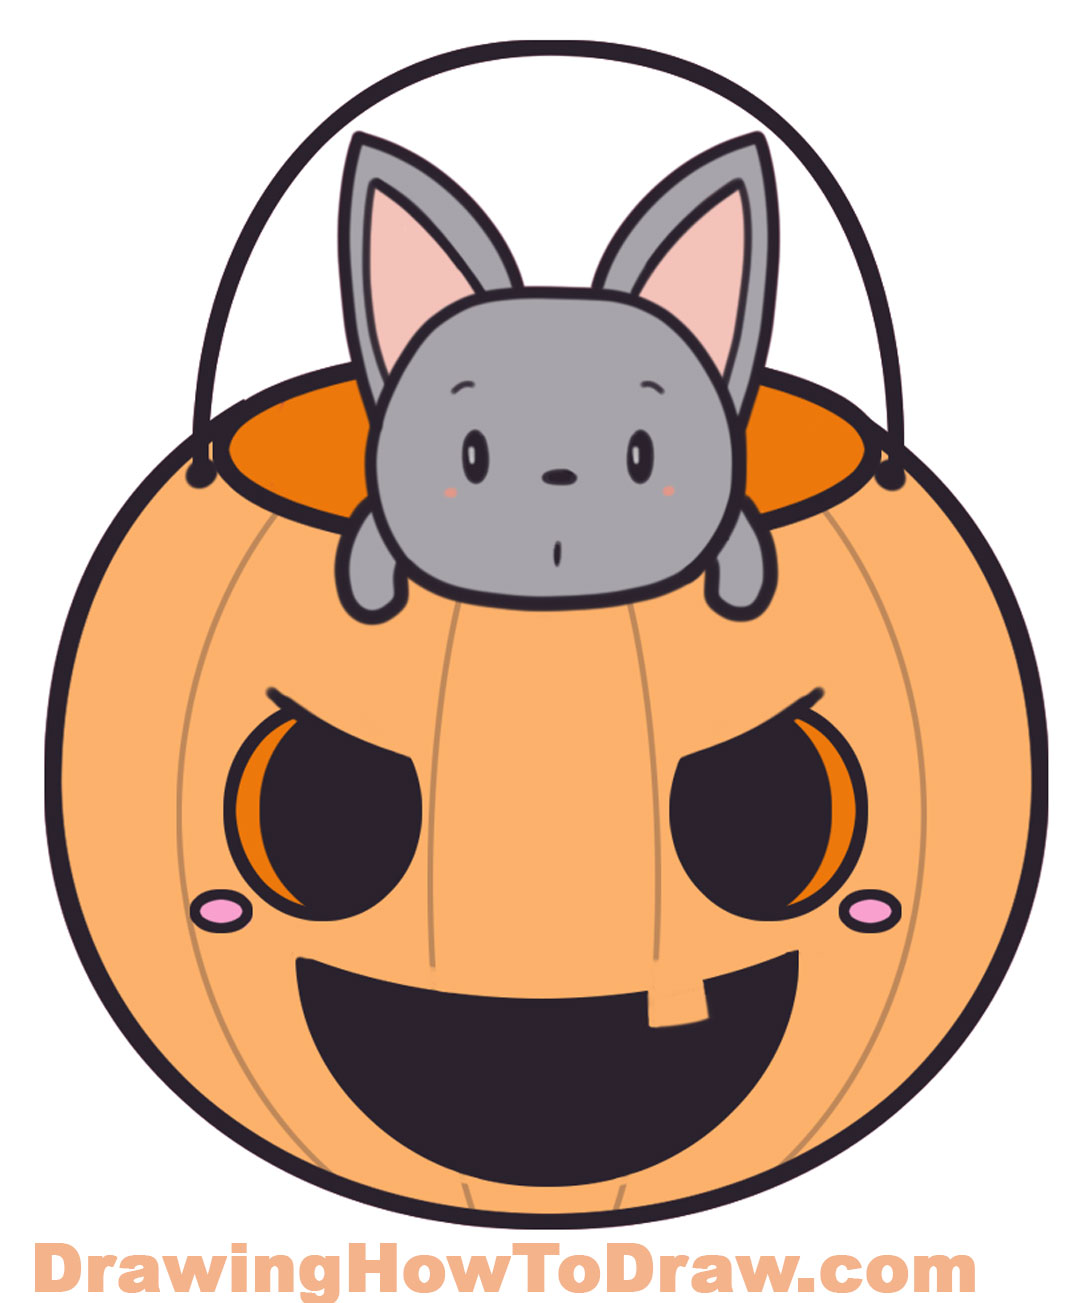 drawing a cute kawaii chibi cat in a pumpkin jack o lantern trick or treat candy basket easy step by step drawing tutorial for kids